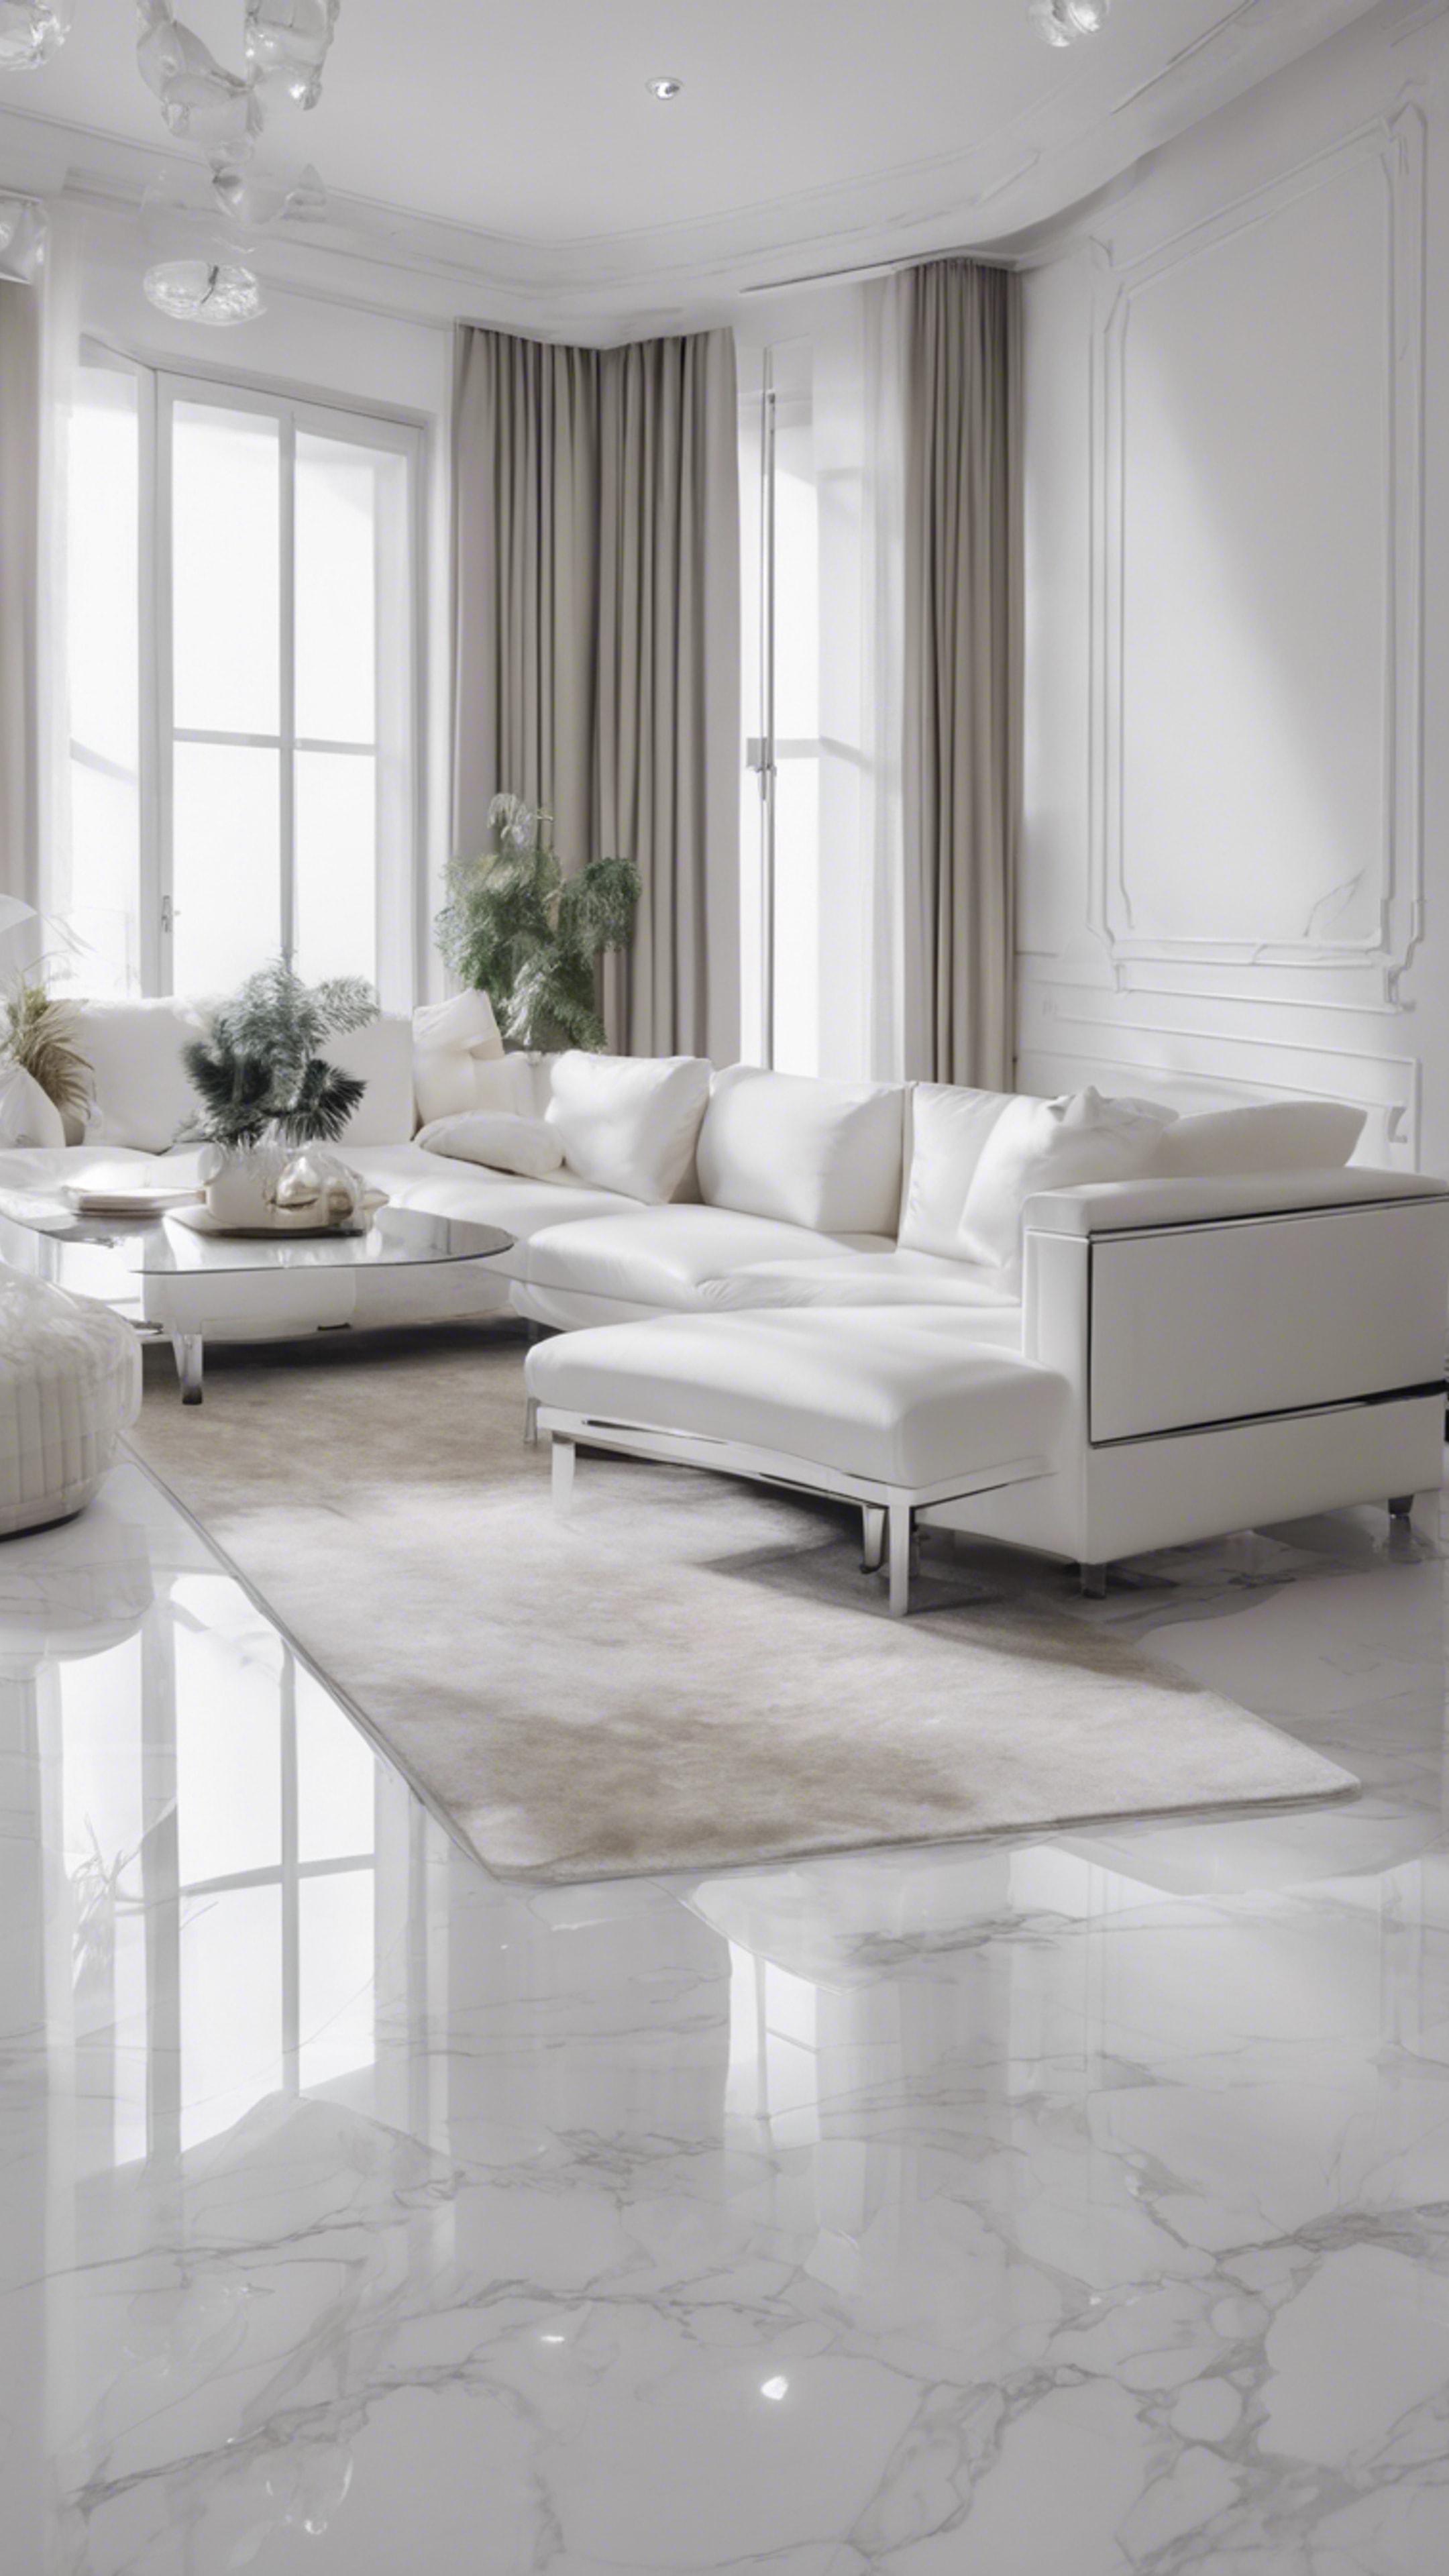 An ultra-modern minimalist interior design of a living room, with cool white walls, silver furniture and white marble floors. Wallpaper[0b803decb0d241b99c2a]